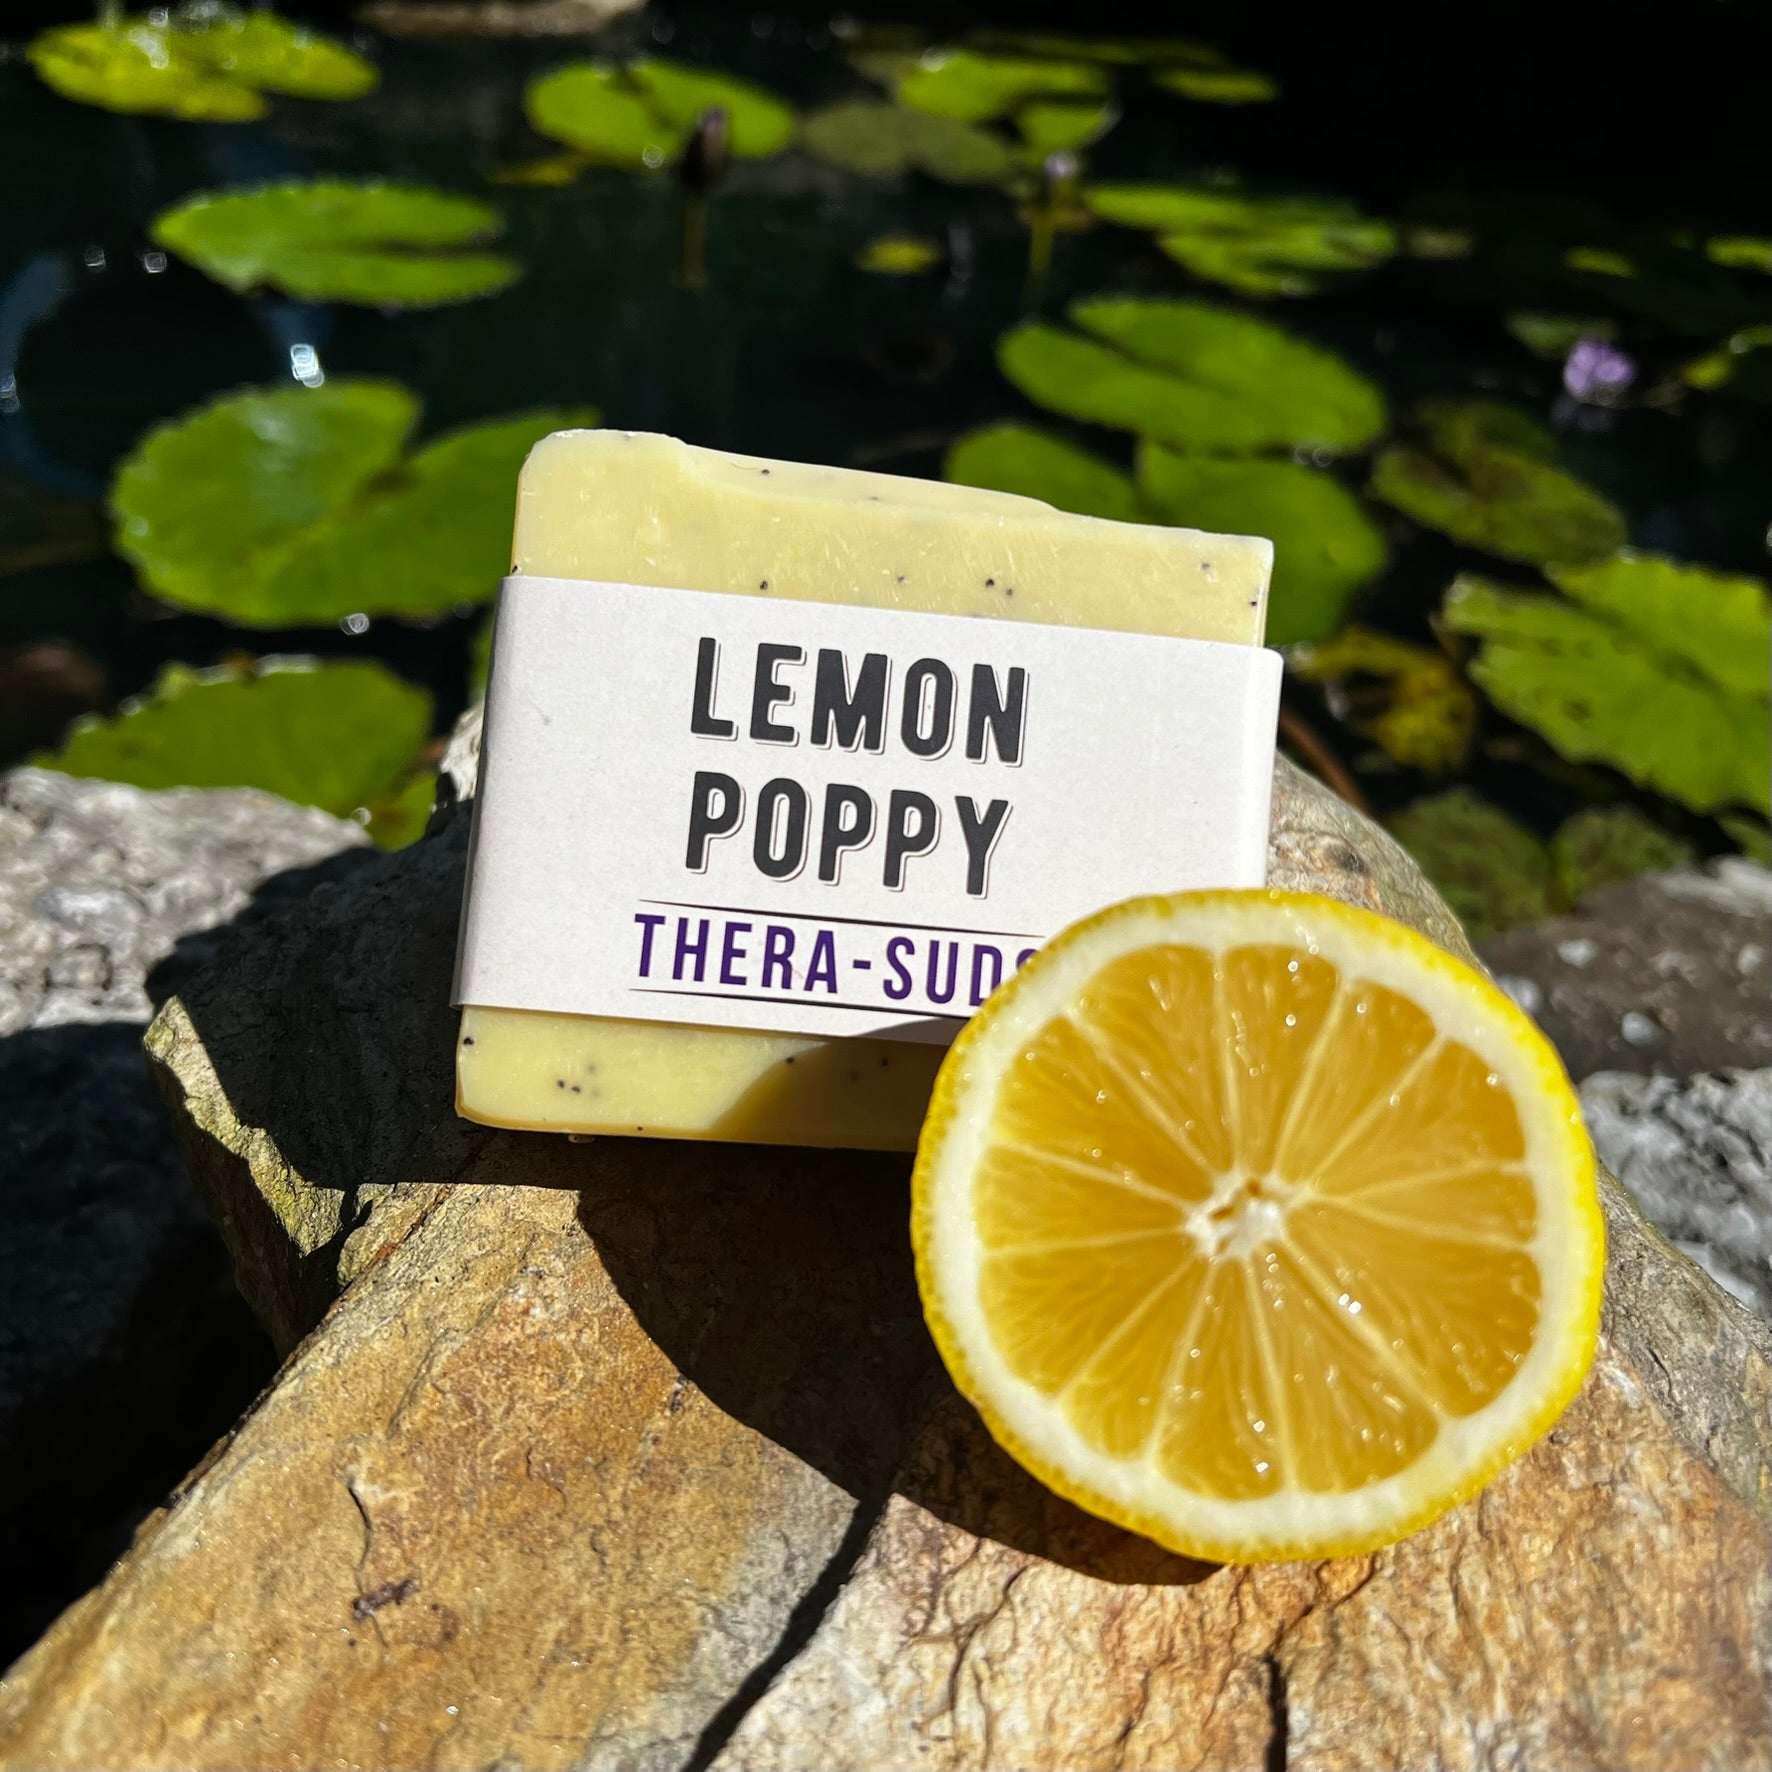 natural soaps made with herbs, fruits and spices